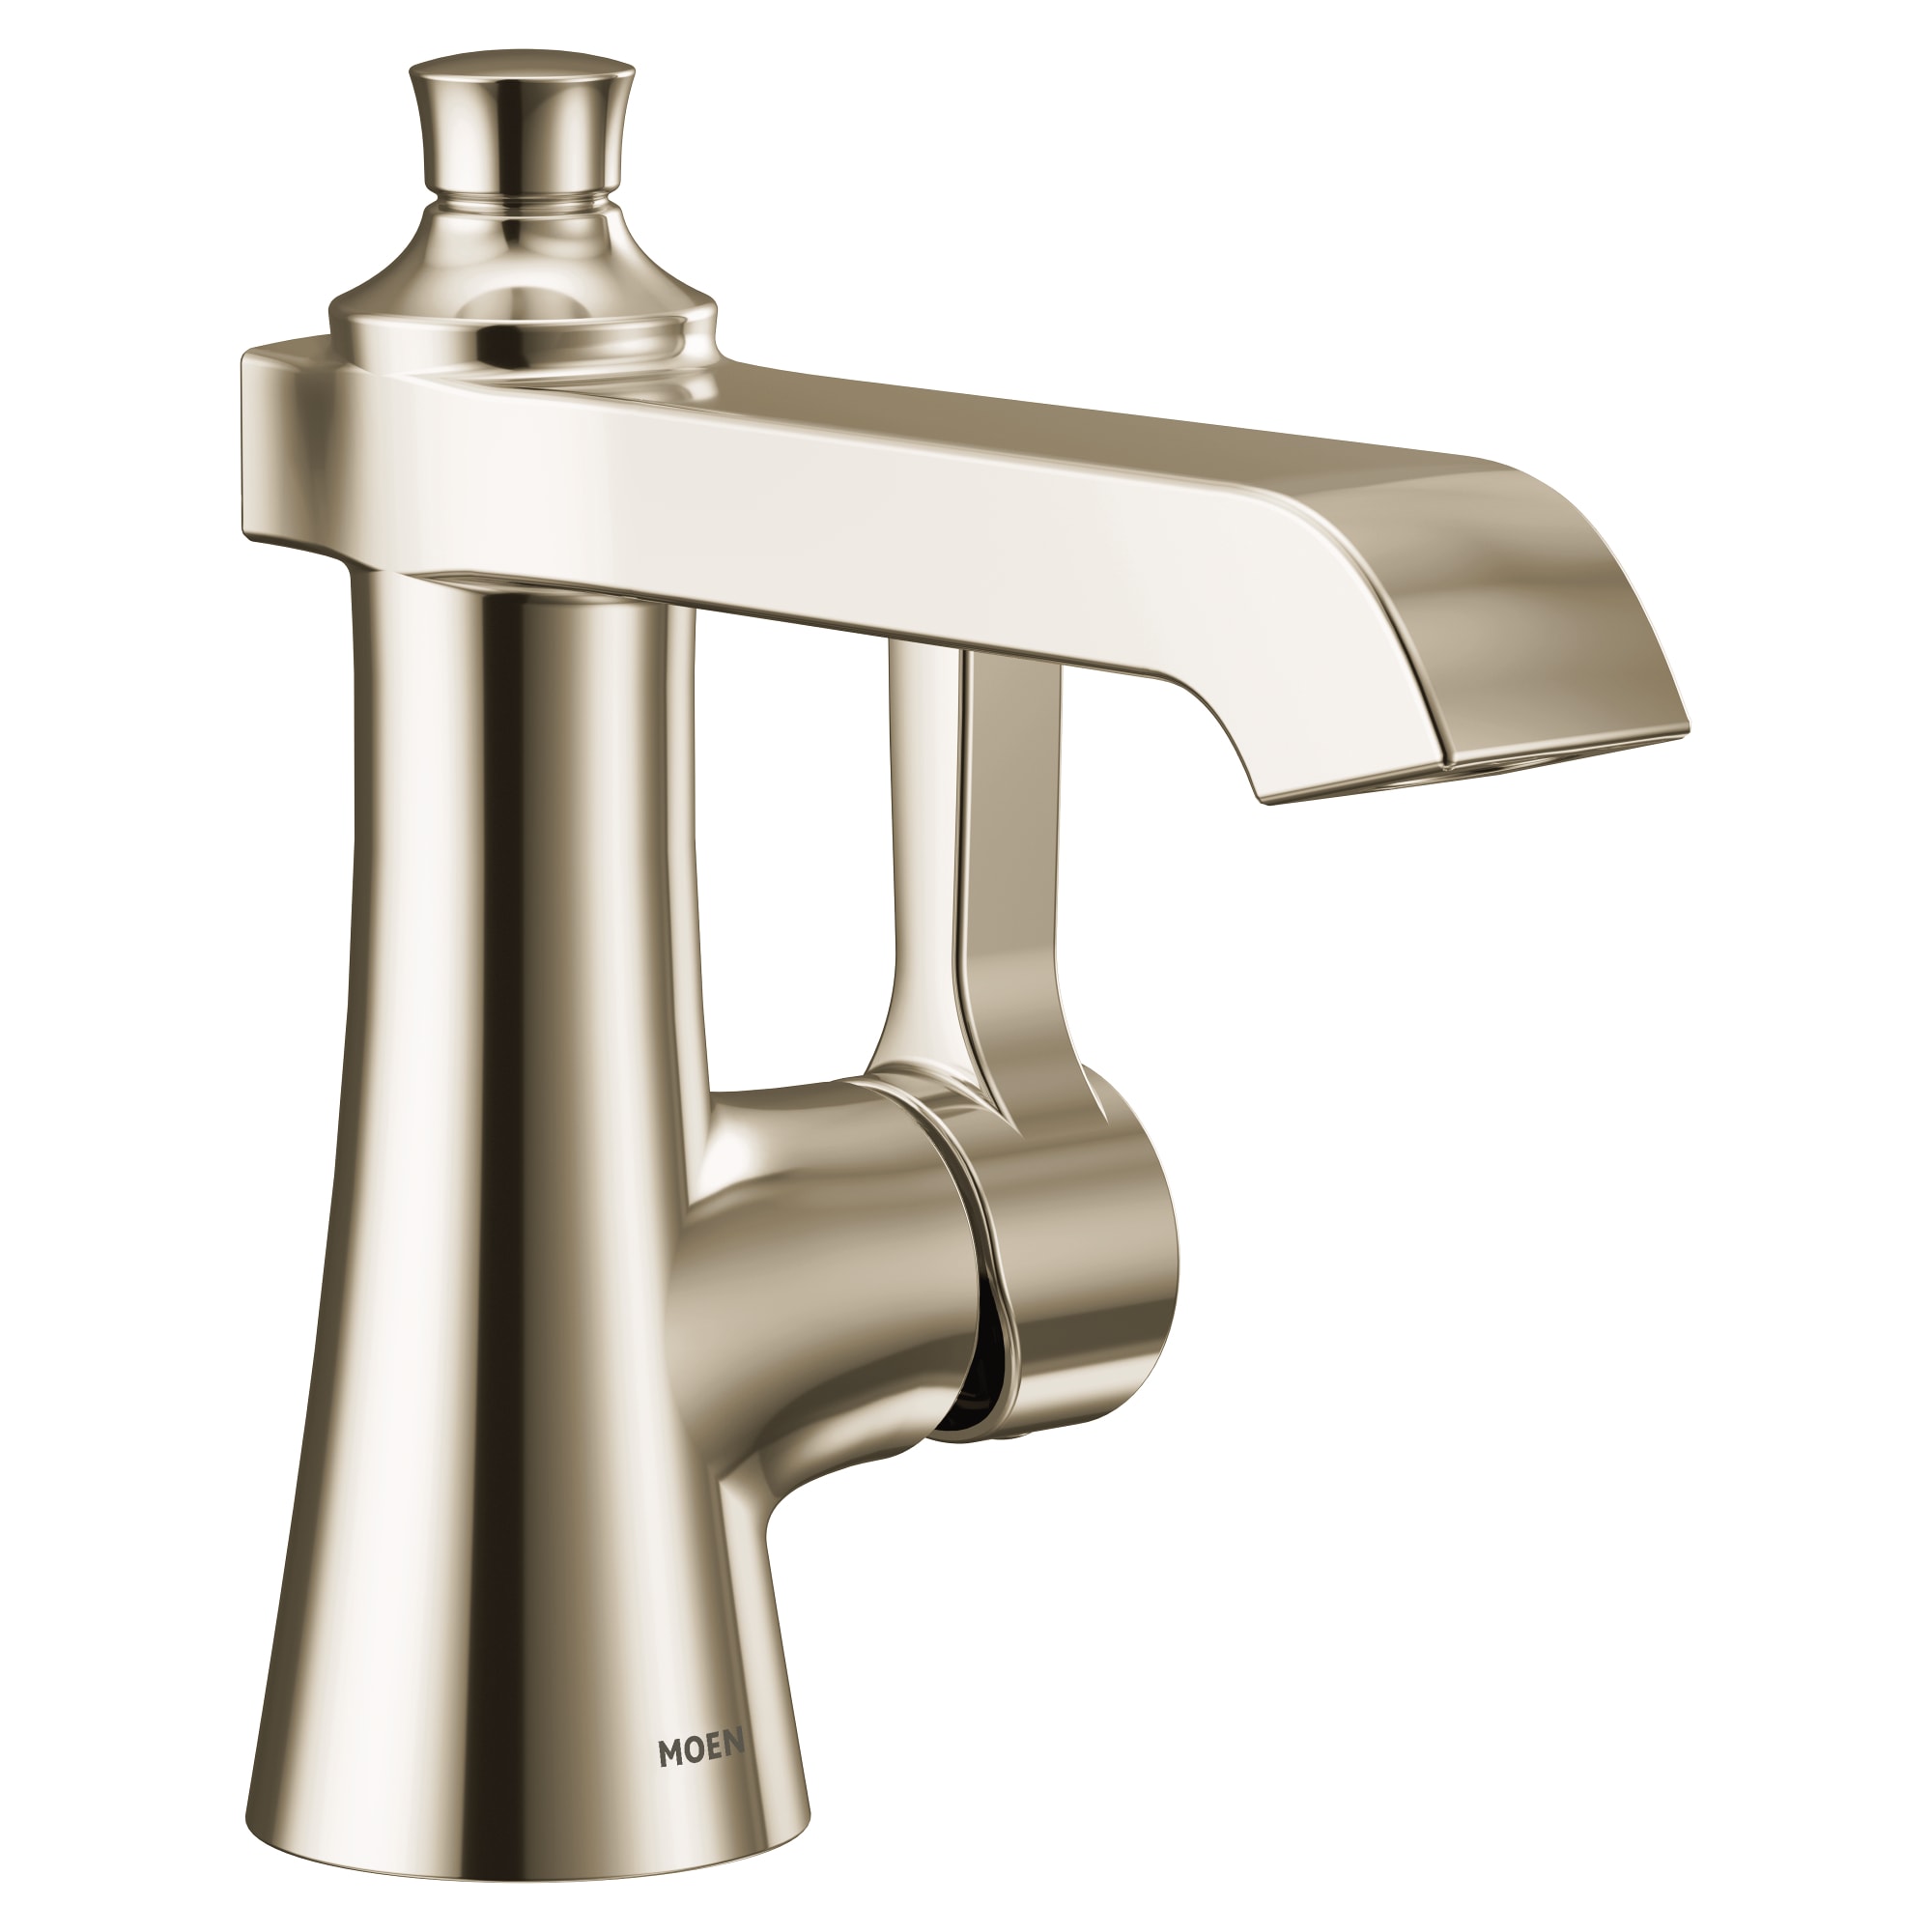 Moen New Style Duralast Single Lever Replacement Cartridge. 